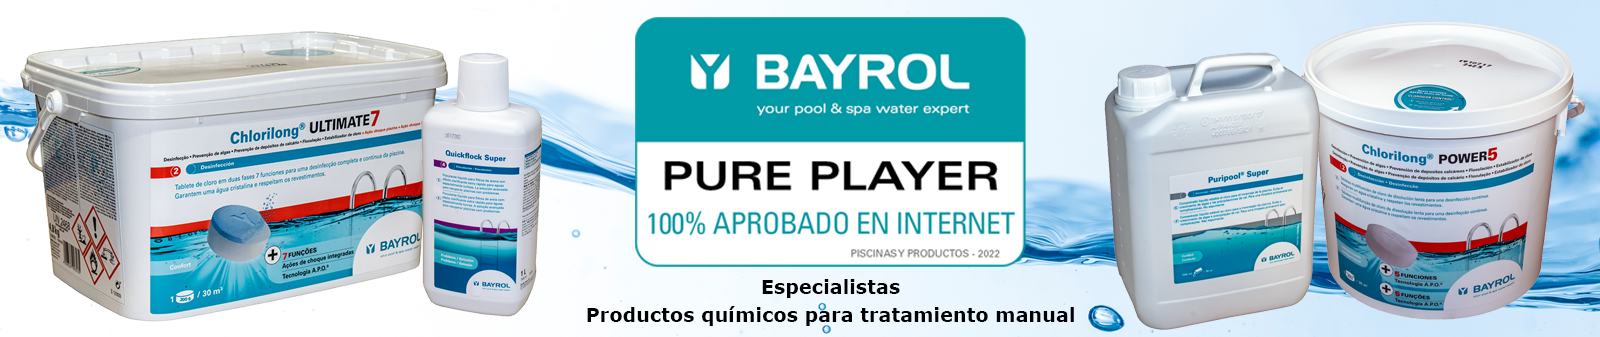 Banner-bayrol-chemical-products-w.png